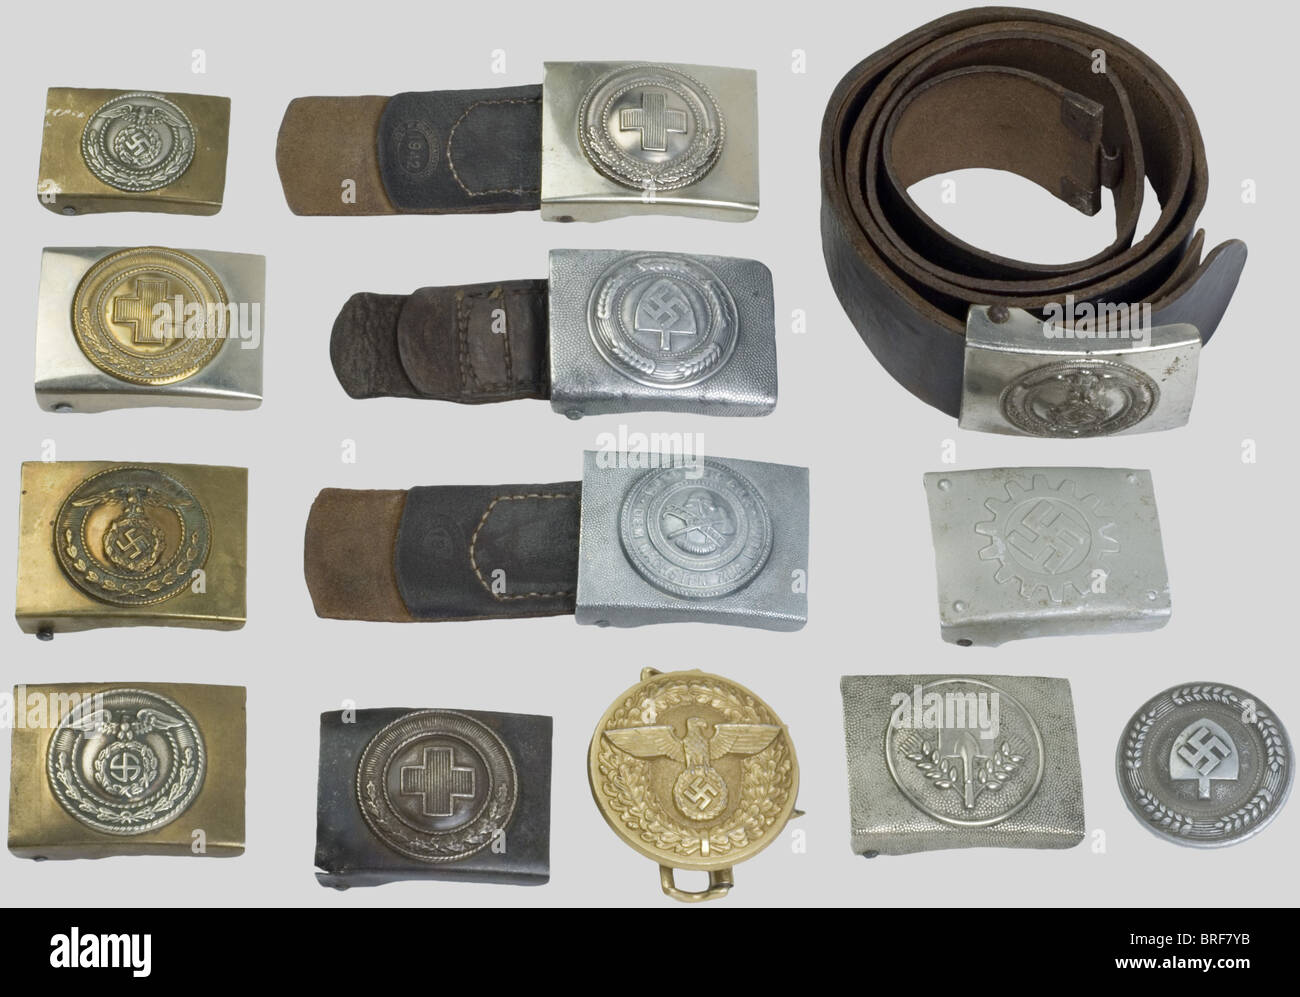 A group de belt buckles, including three for enlisted men S.A. (two for belts and a small size one), one D.A.F., one for enlisted man N.S.S.K. with its leather, a first version (early model) R.A.D. for enlisted men (volunteer), one for R.A.D. enlisted men, one for officer R.A.D. (one loop missing), one round N.S.D.A.P. leader belt buckle, etc., historic, historical, 1930s, 1930s, 20th century, object, objects, stills, clipping, clippings, cut out, cut-out, cut-outs, utensil, piece of equipment, utensils, item, items, Stock Photo